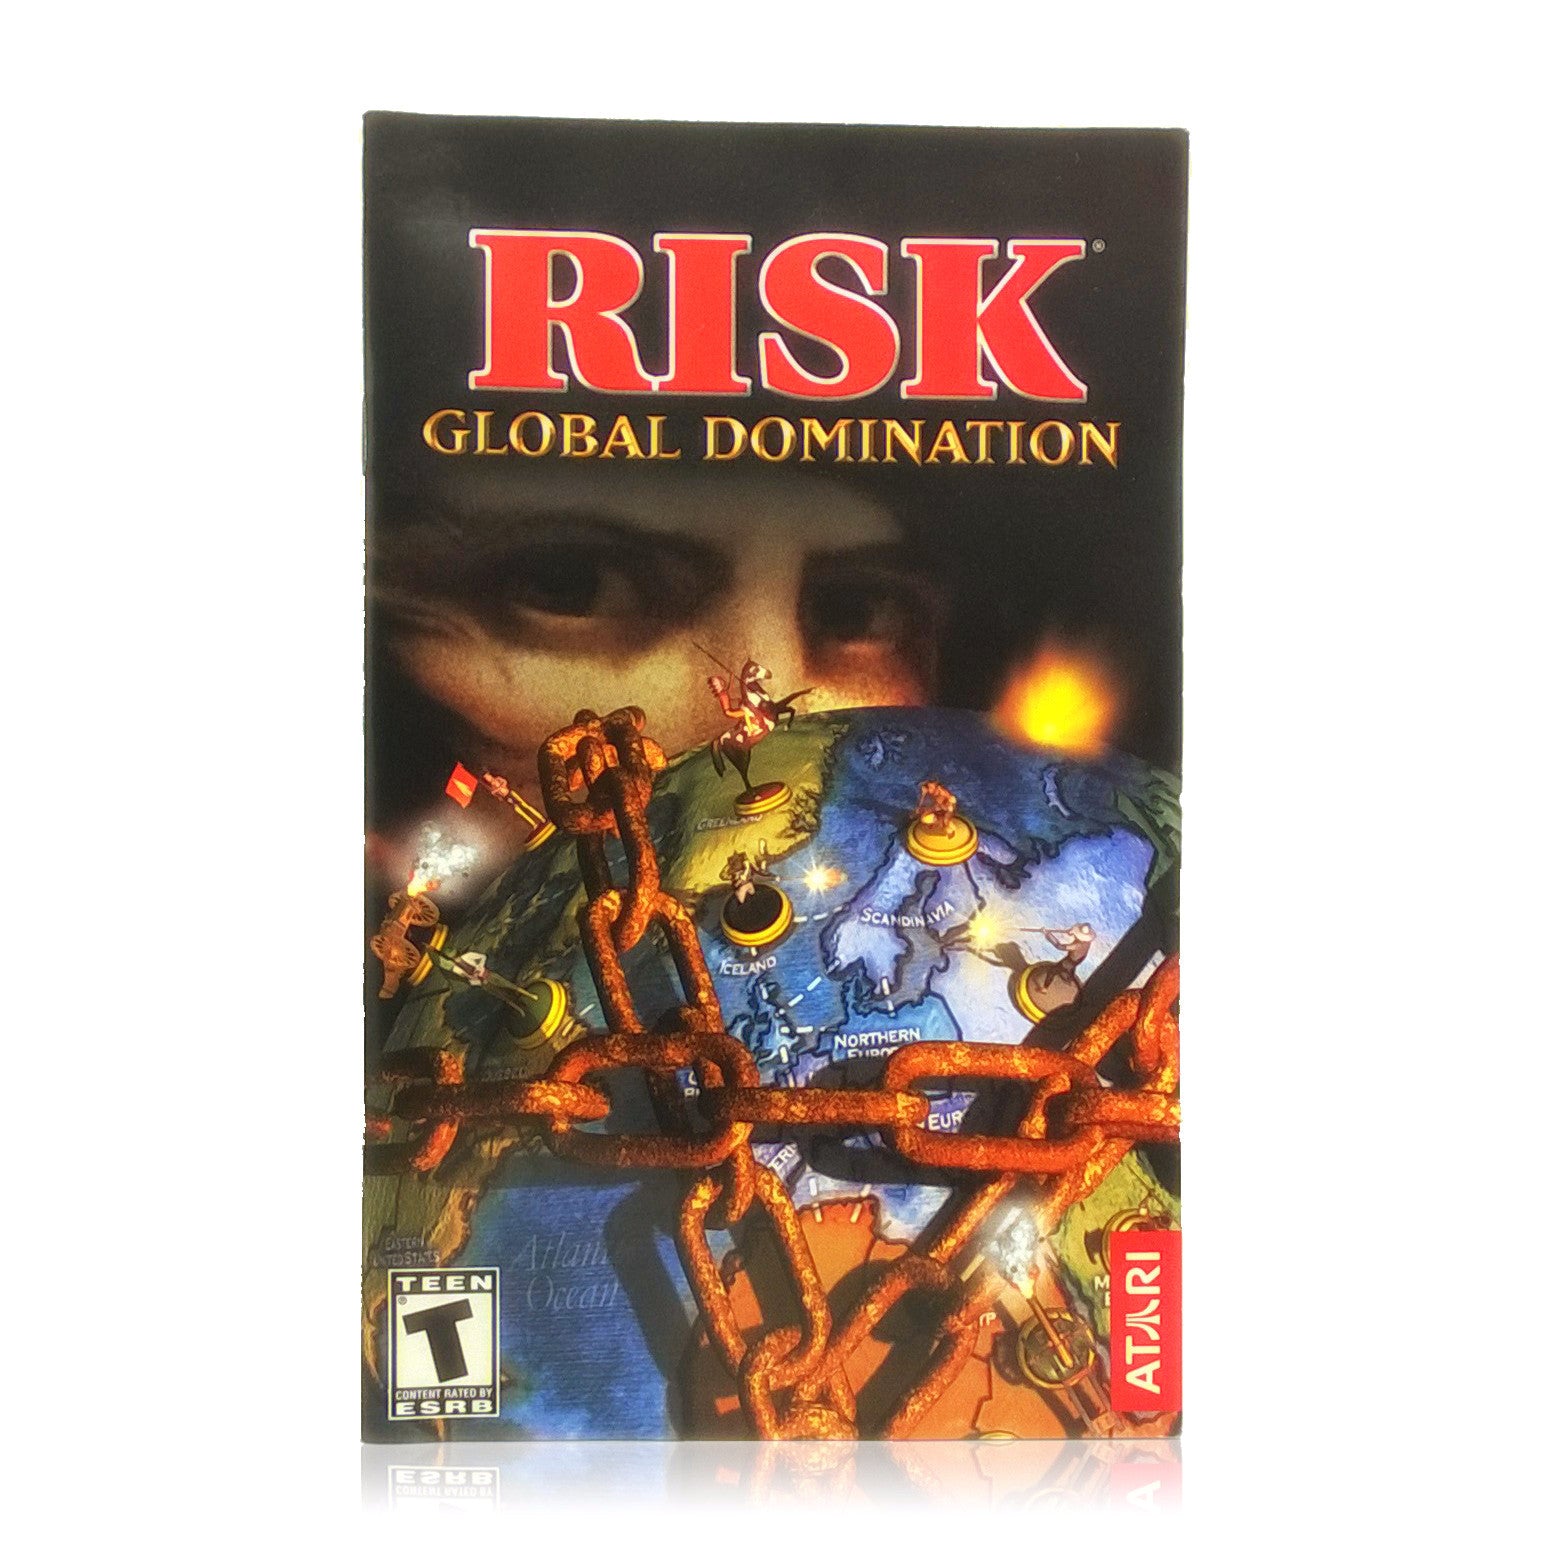 RISK: Global Domination Sony PlayStation 2 Game - Manual